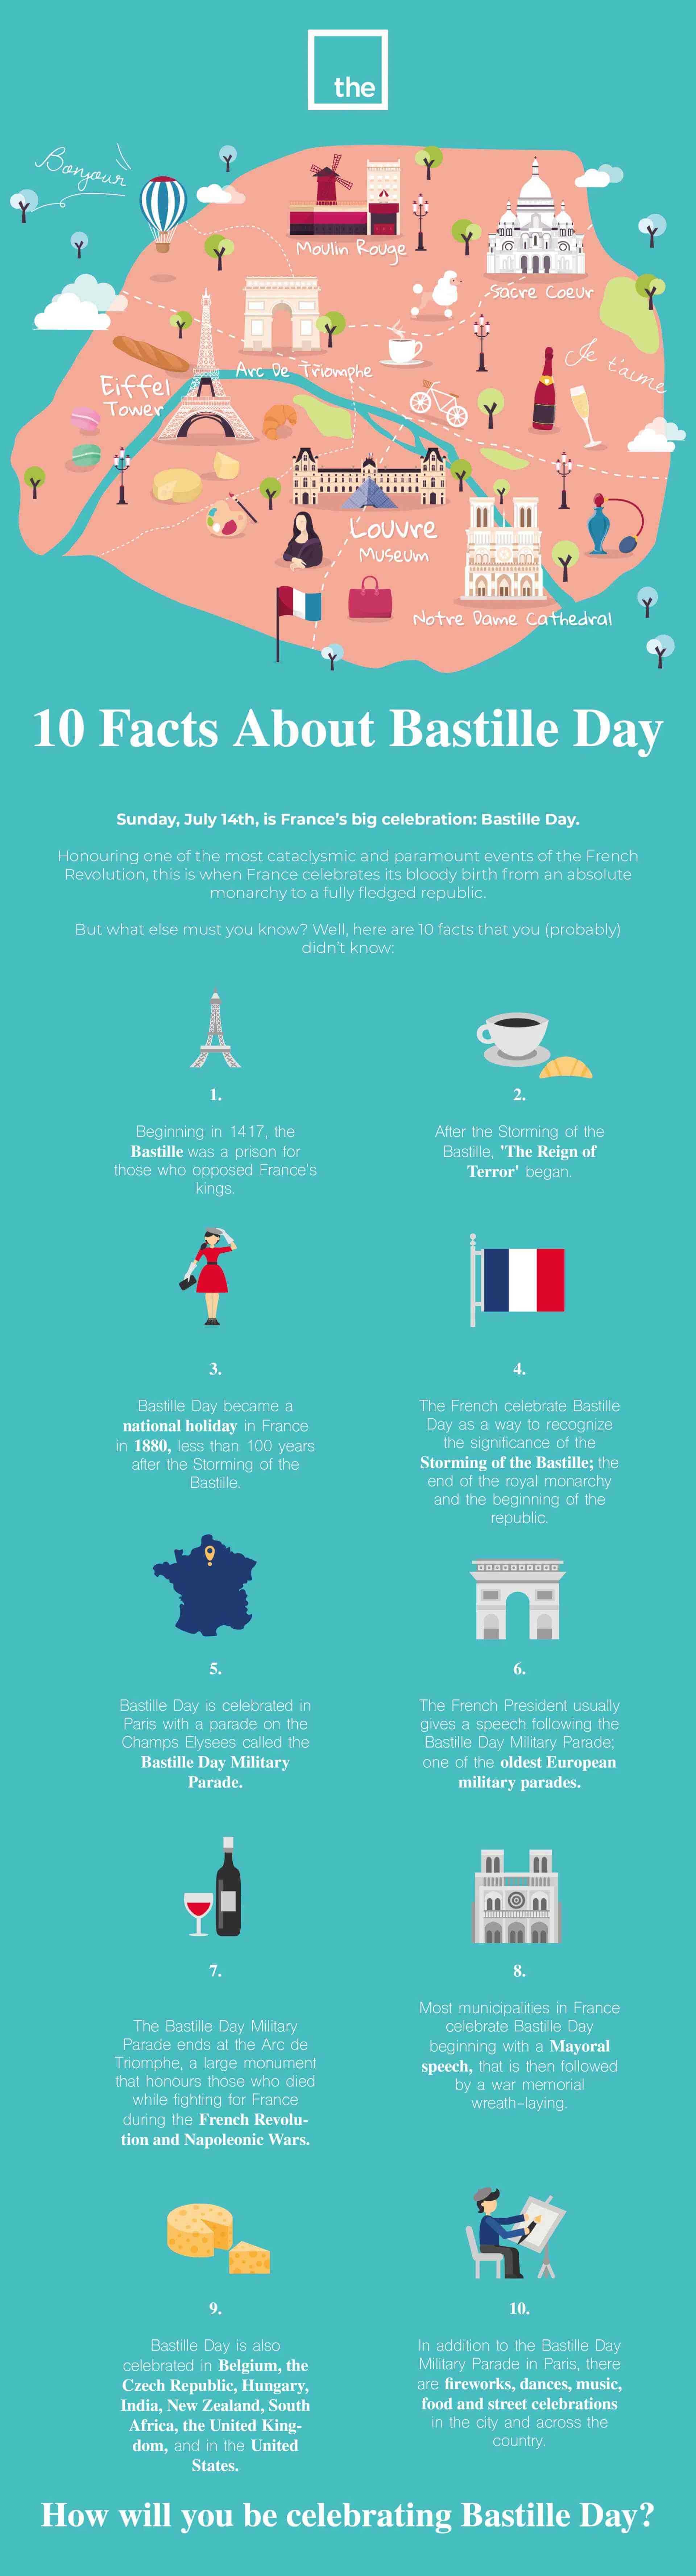 10 Facts About Bastille Day - Infographic